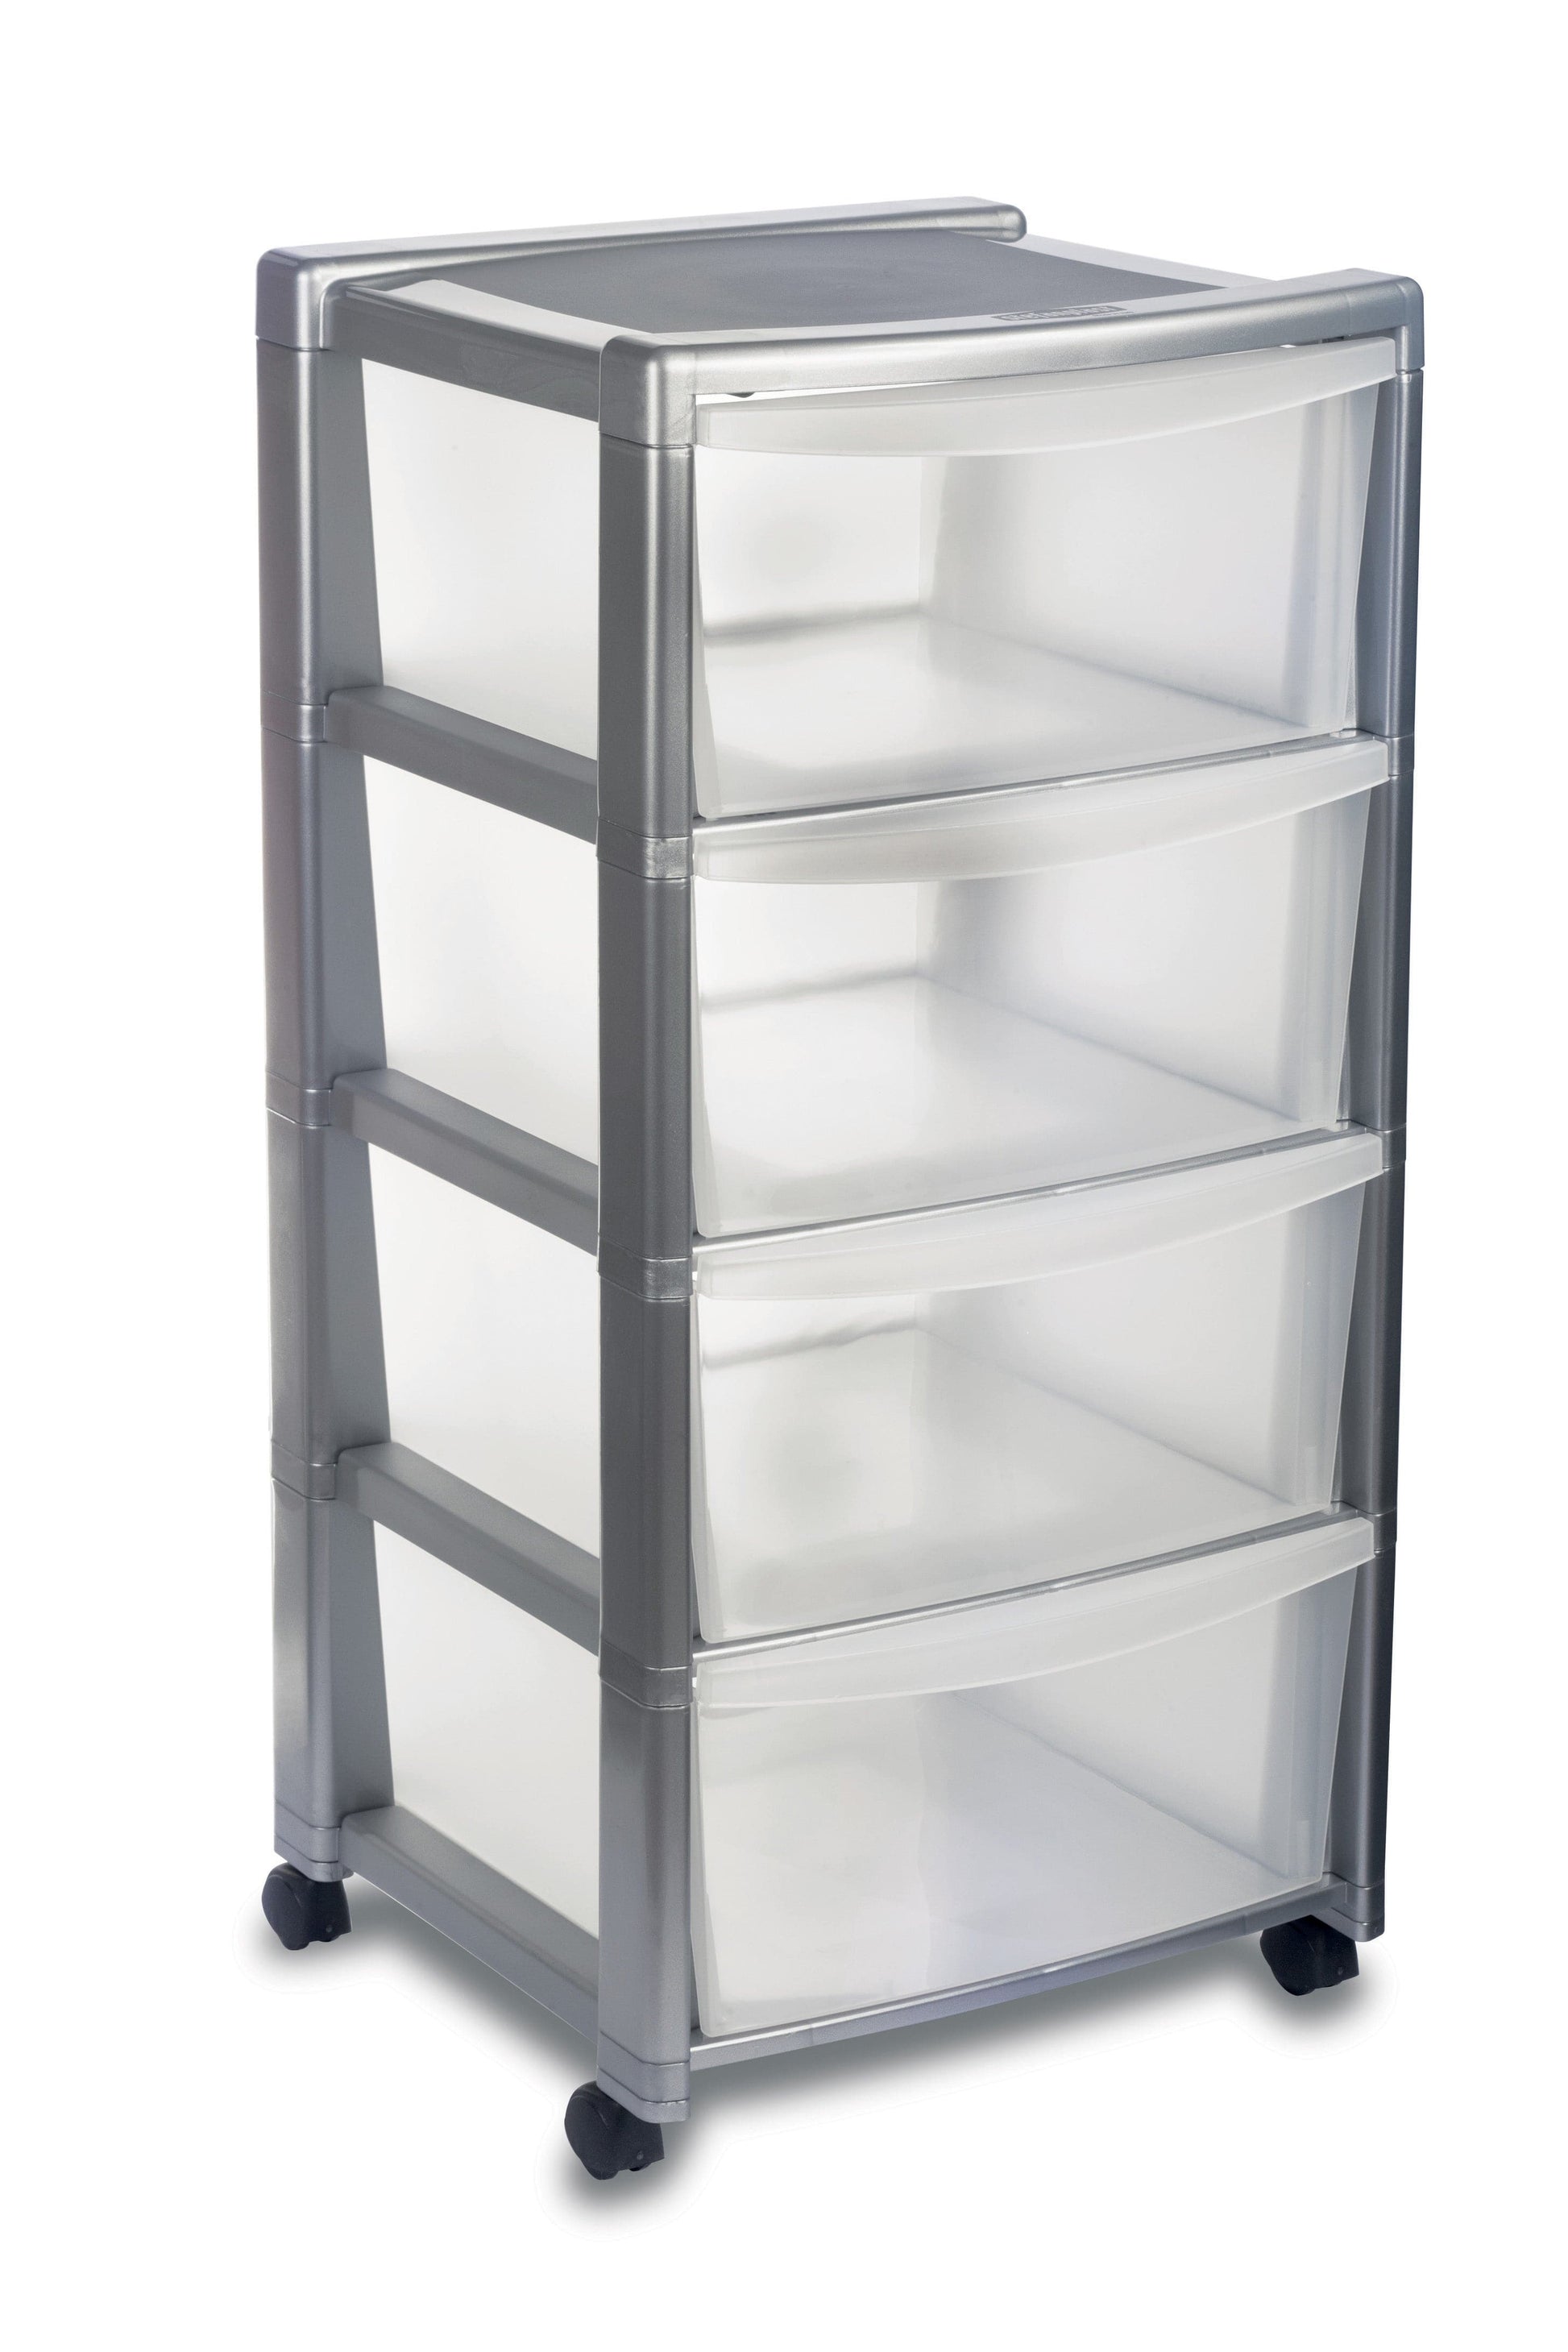 SILVER CABINET 4 TRANSPARENT DRAWERS H80xW40xD40CM PLASTIC CABINET WITH WHEELS